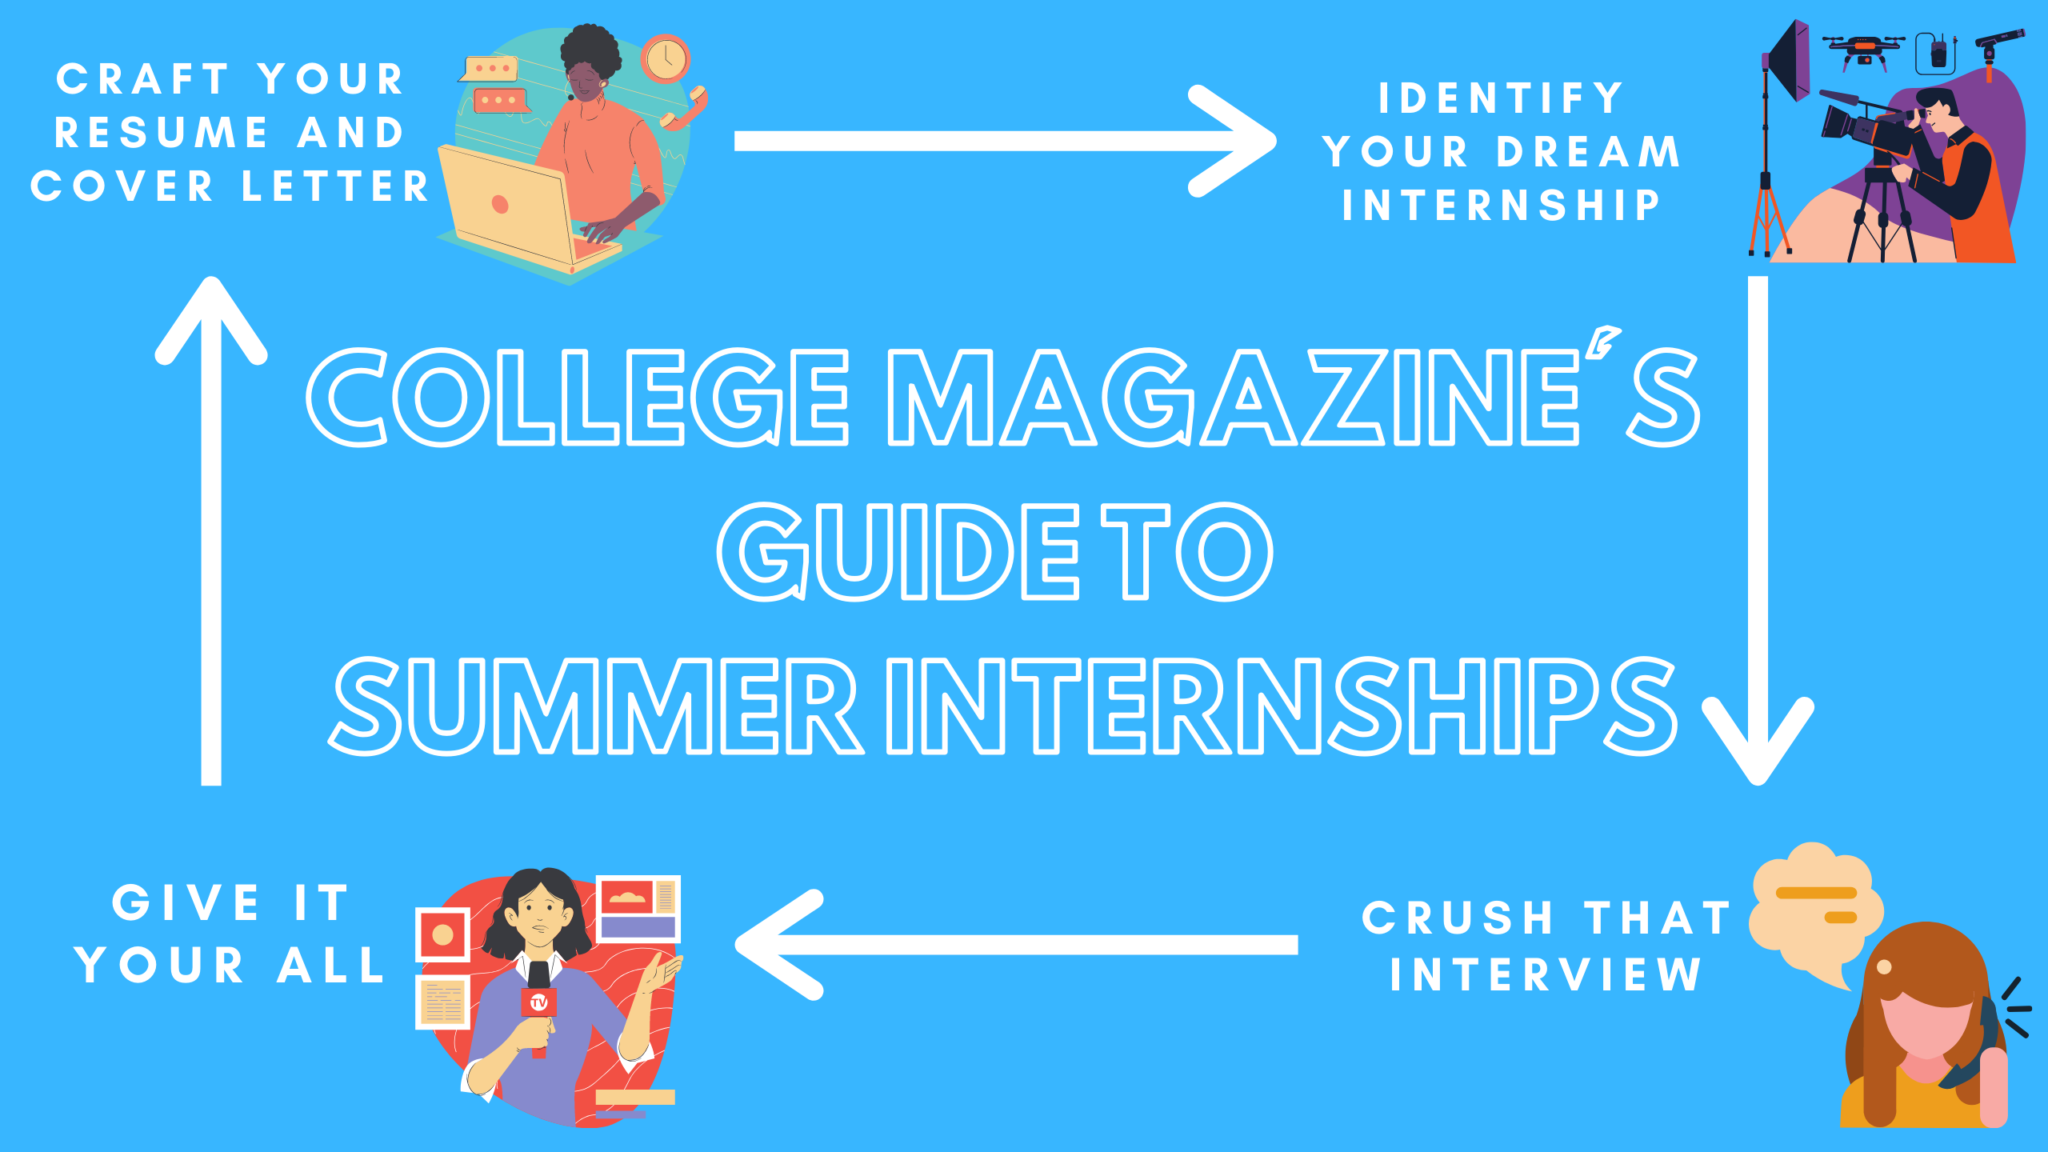 The Ultimate Guide to Summer Internships [Take Action with 4 Steps that